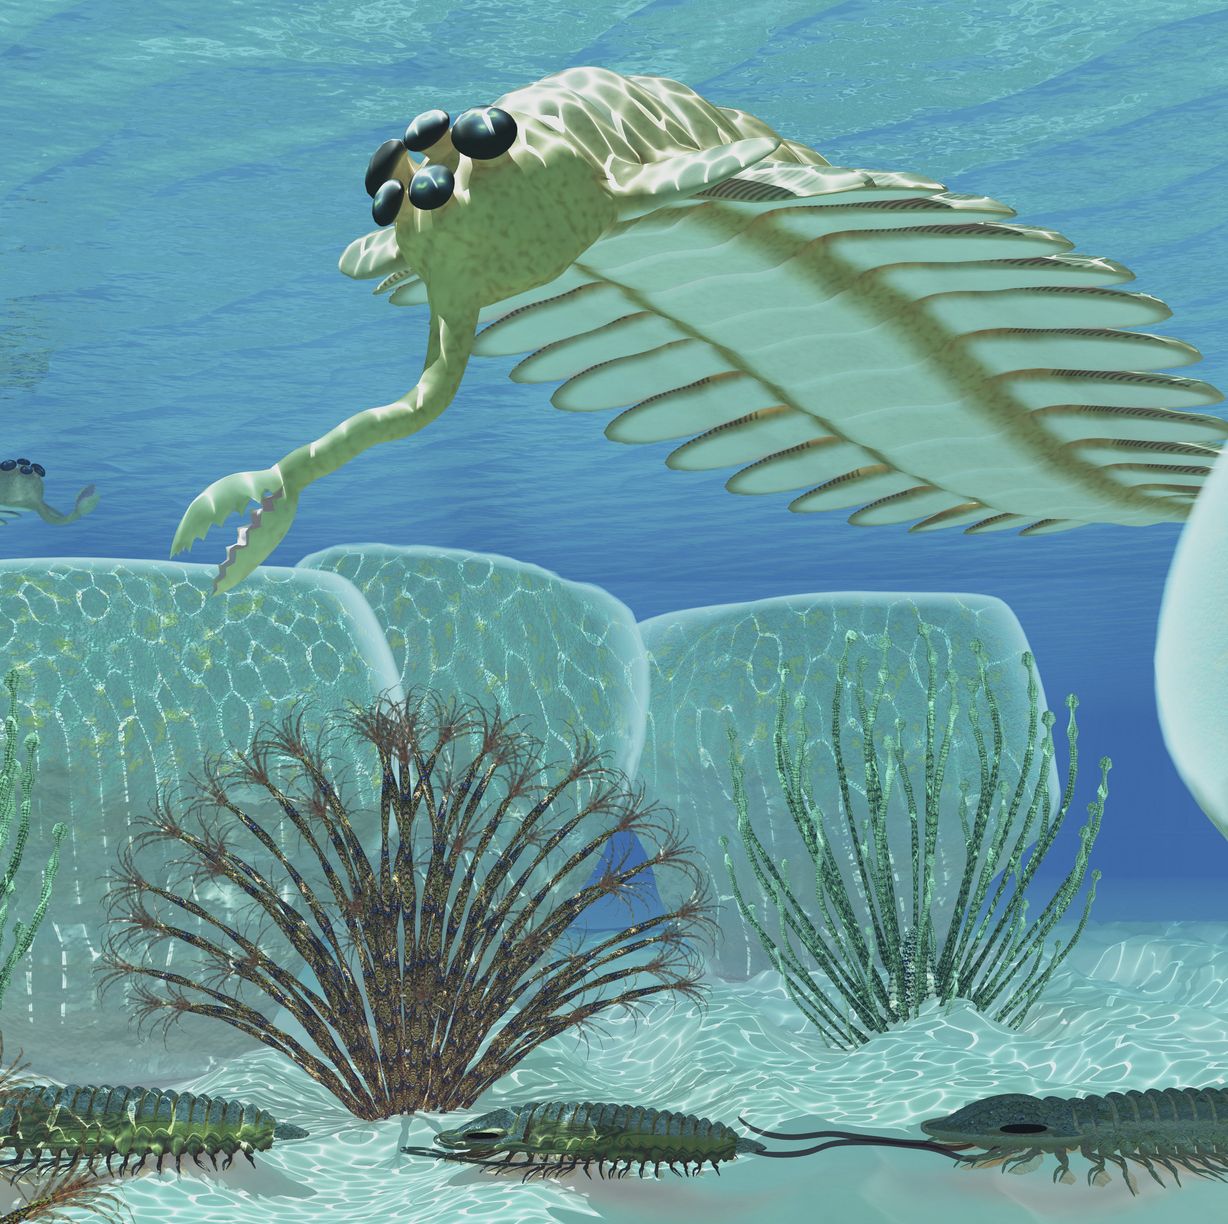 To Understand the Burgess Shale's 500-Million-Year-Old Fossils, We Imagined How They'd Taste